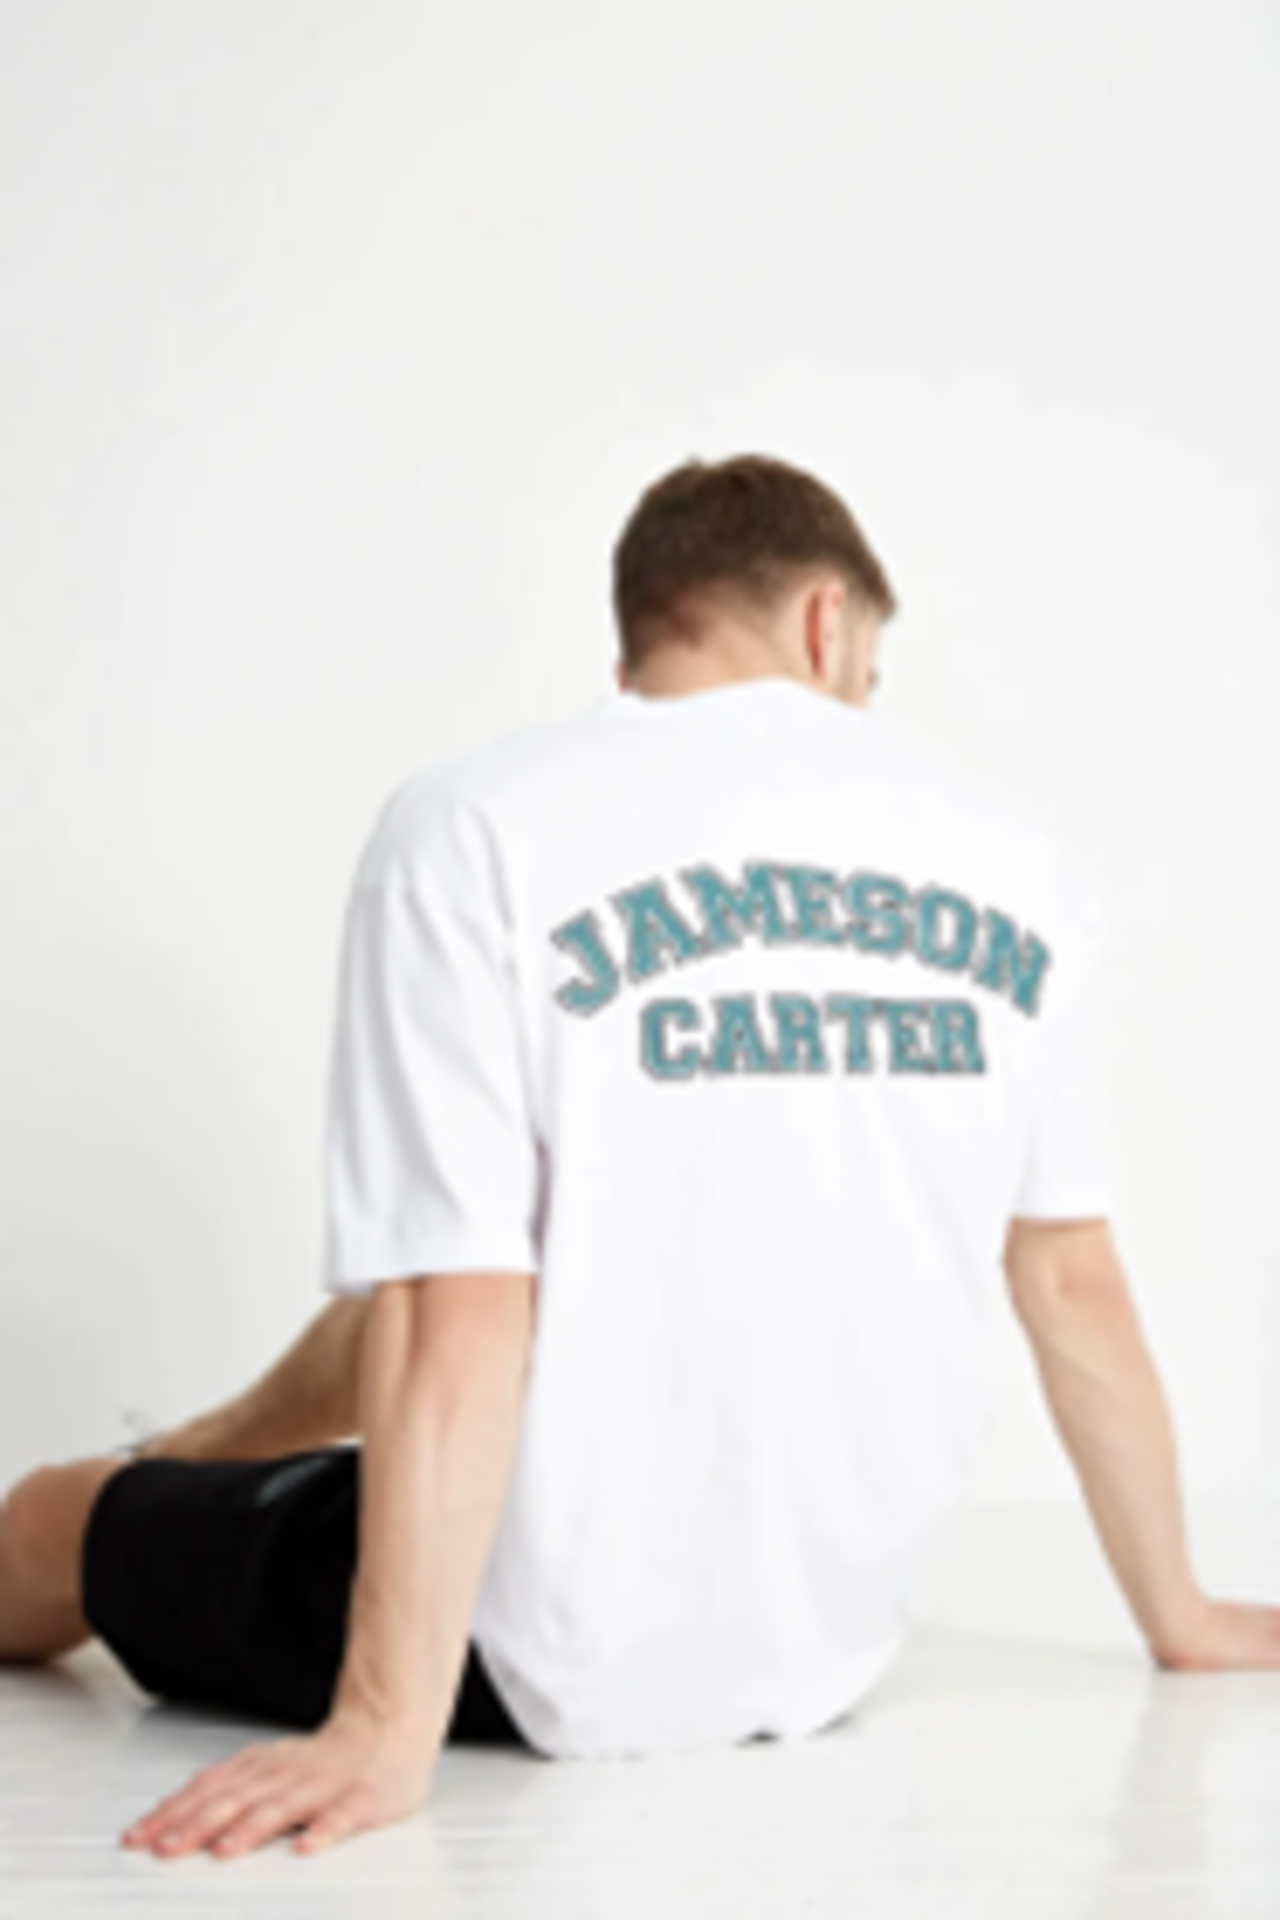 TRADE LOT 100 x NEW MIXED ITEMS OF JAMESON CARTER STOCK. TO INCLUDE ITEMS SUCH AS: JACKETS, - Image 4 of 12